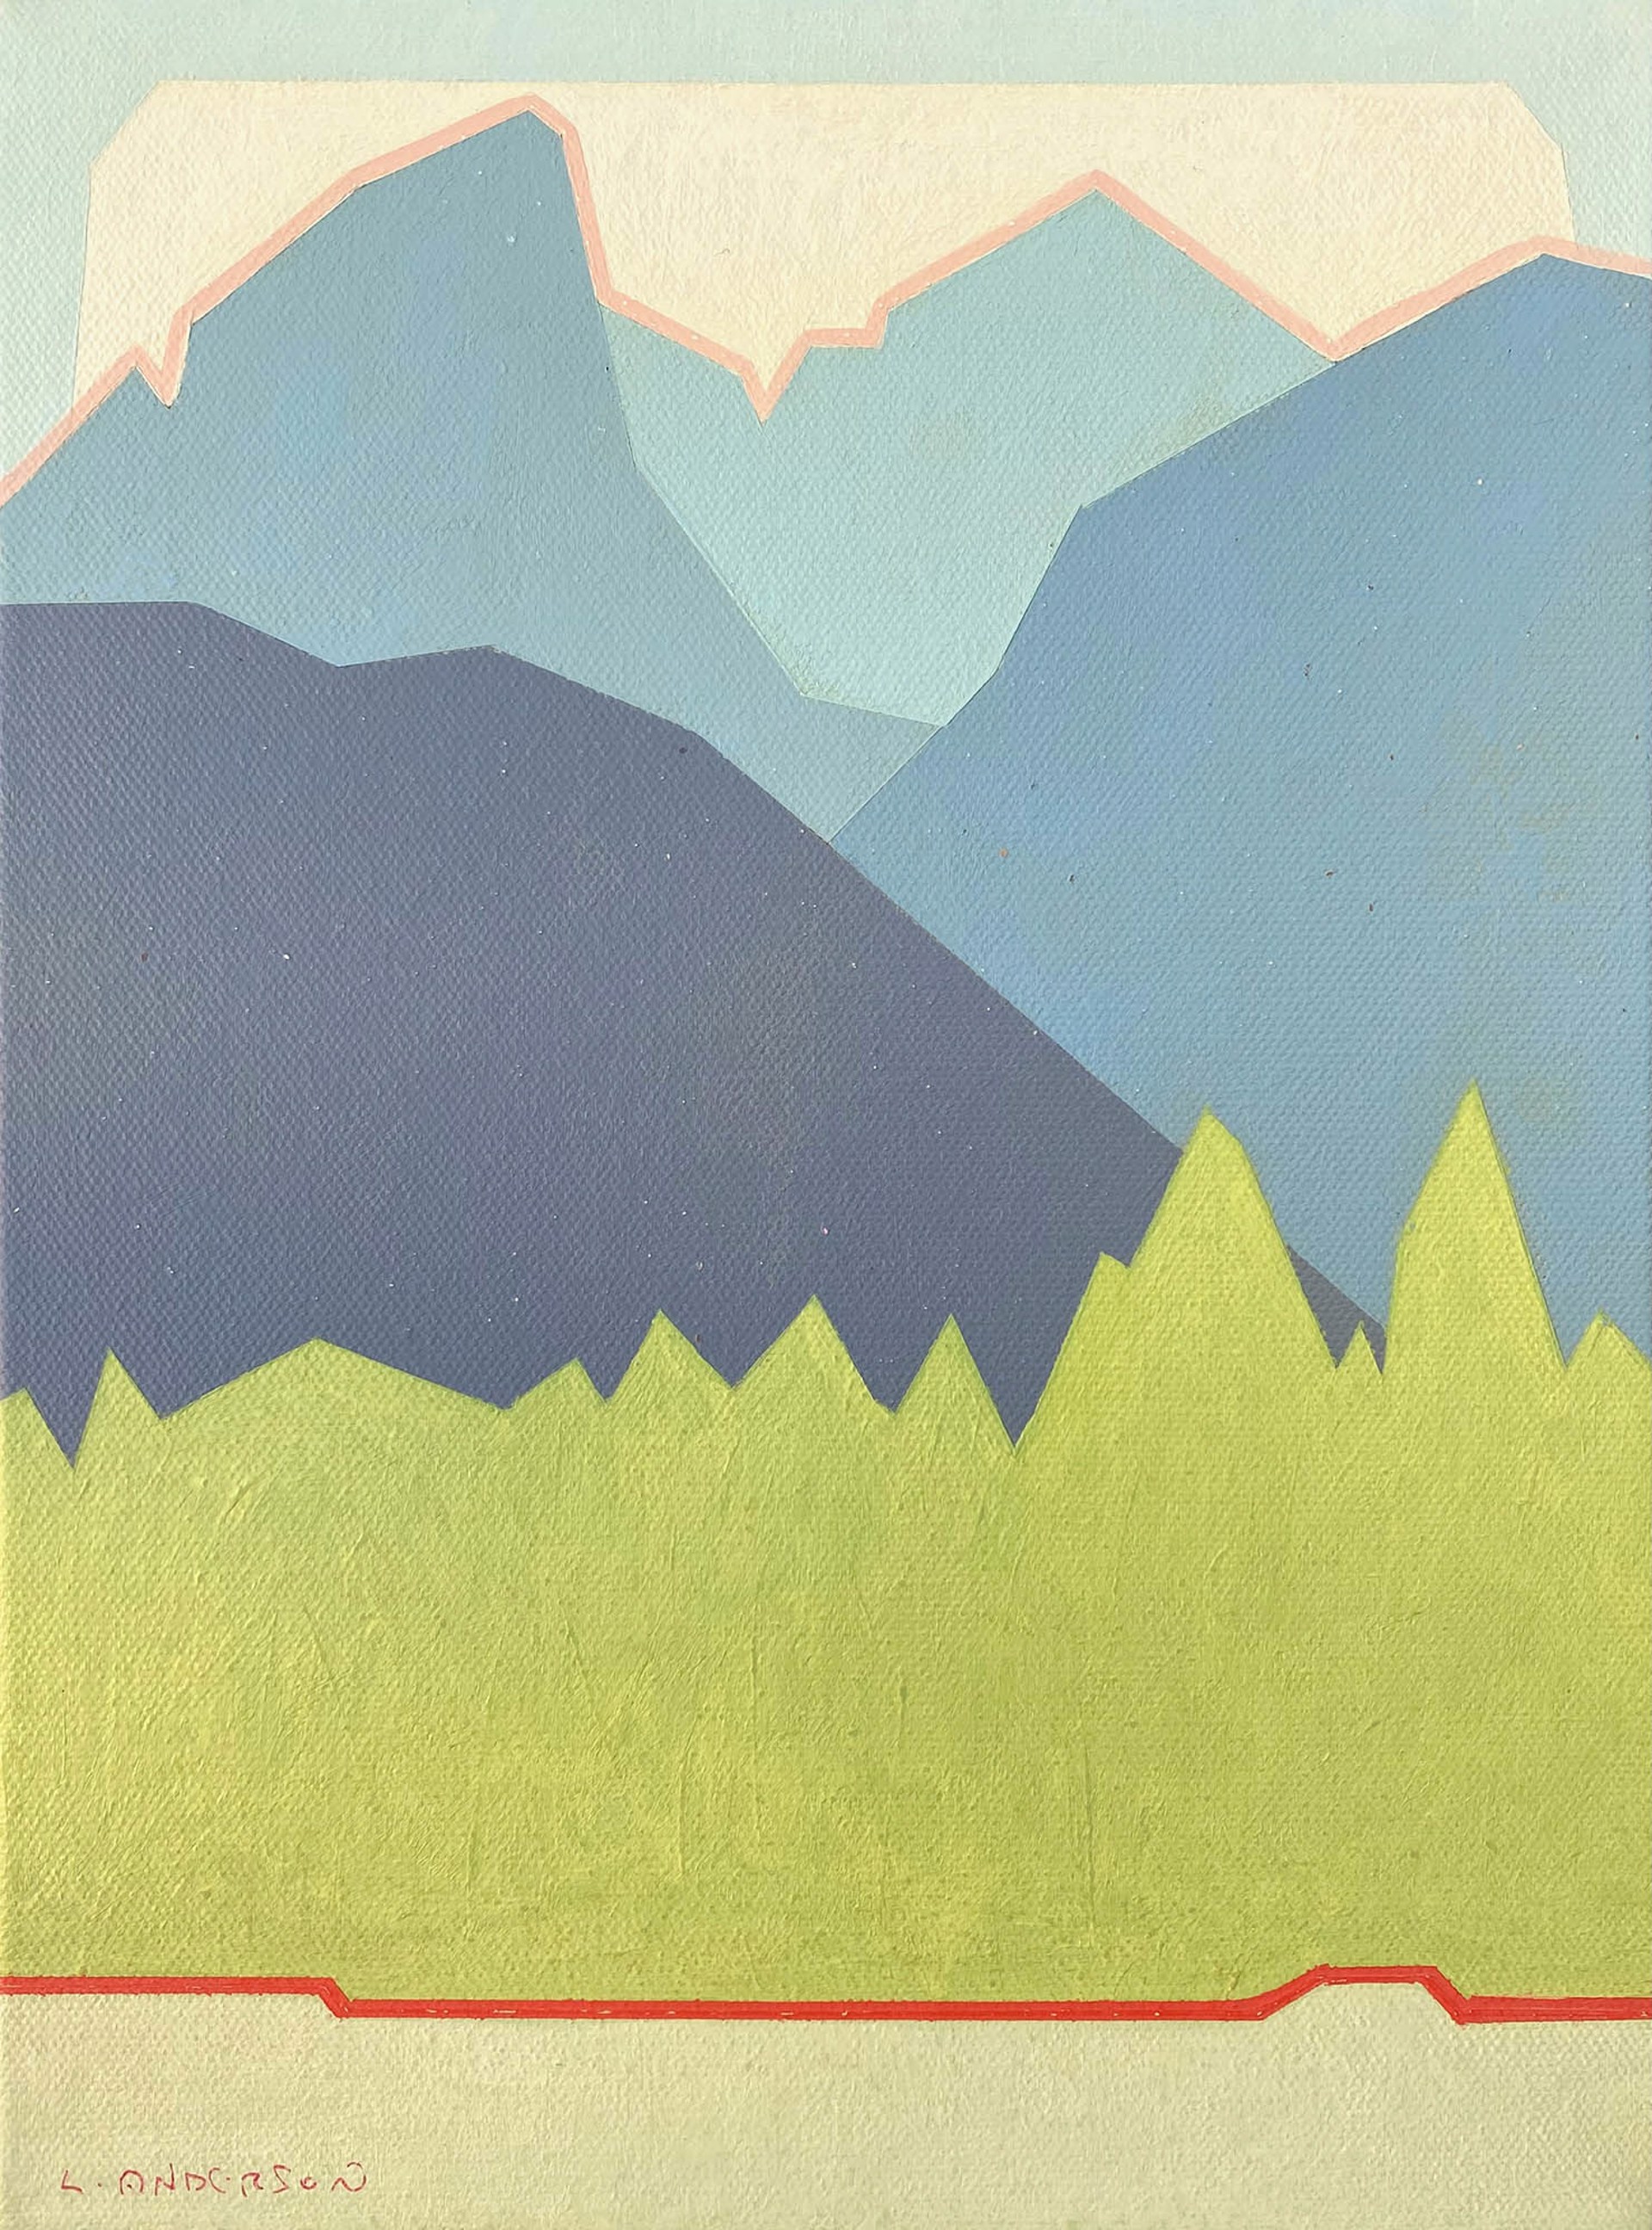 Original Acrylic Painting By Luke Anderson Featuring The Teton Mountain Range In Graphic Style